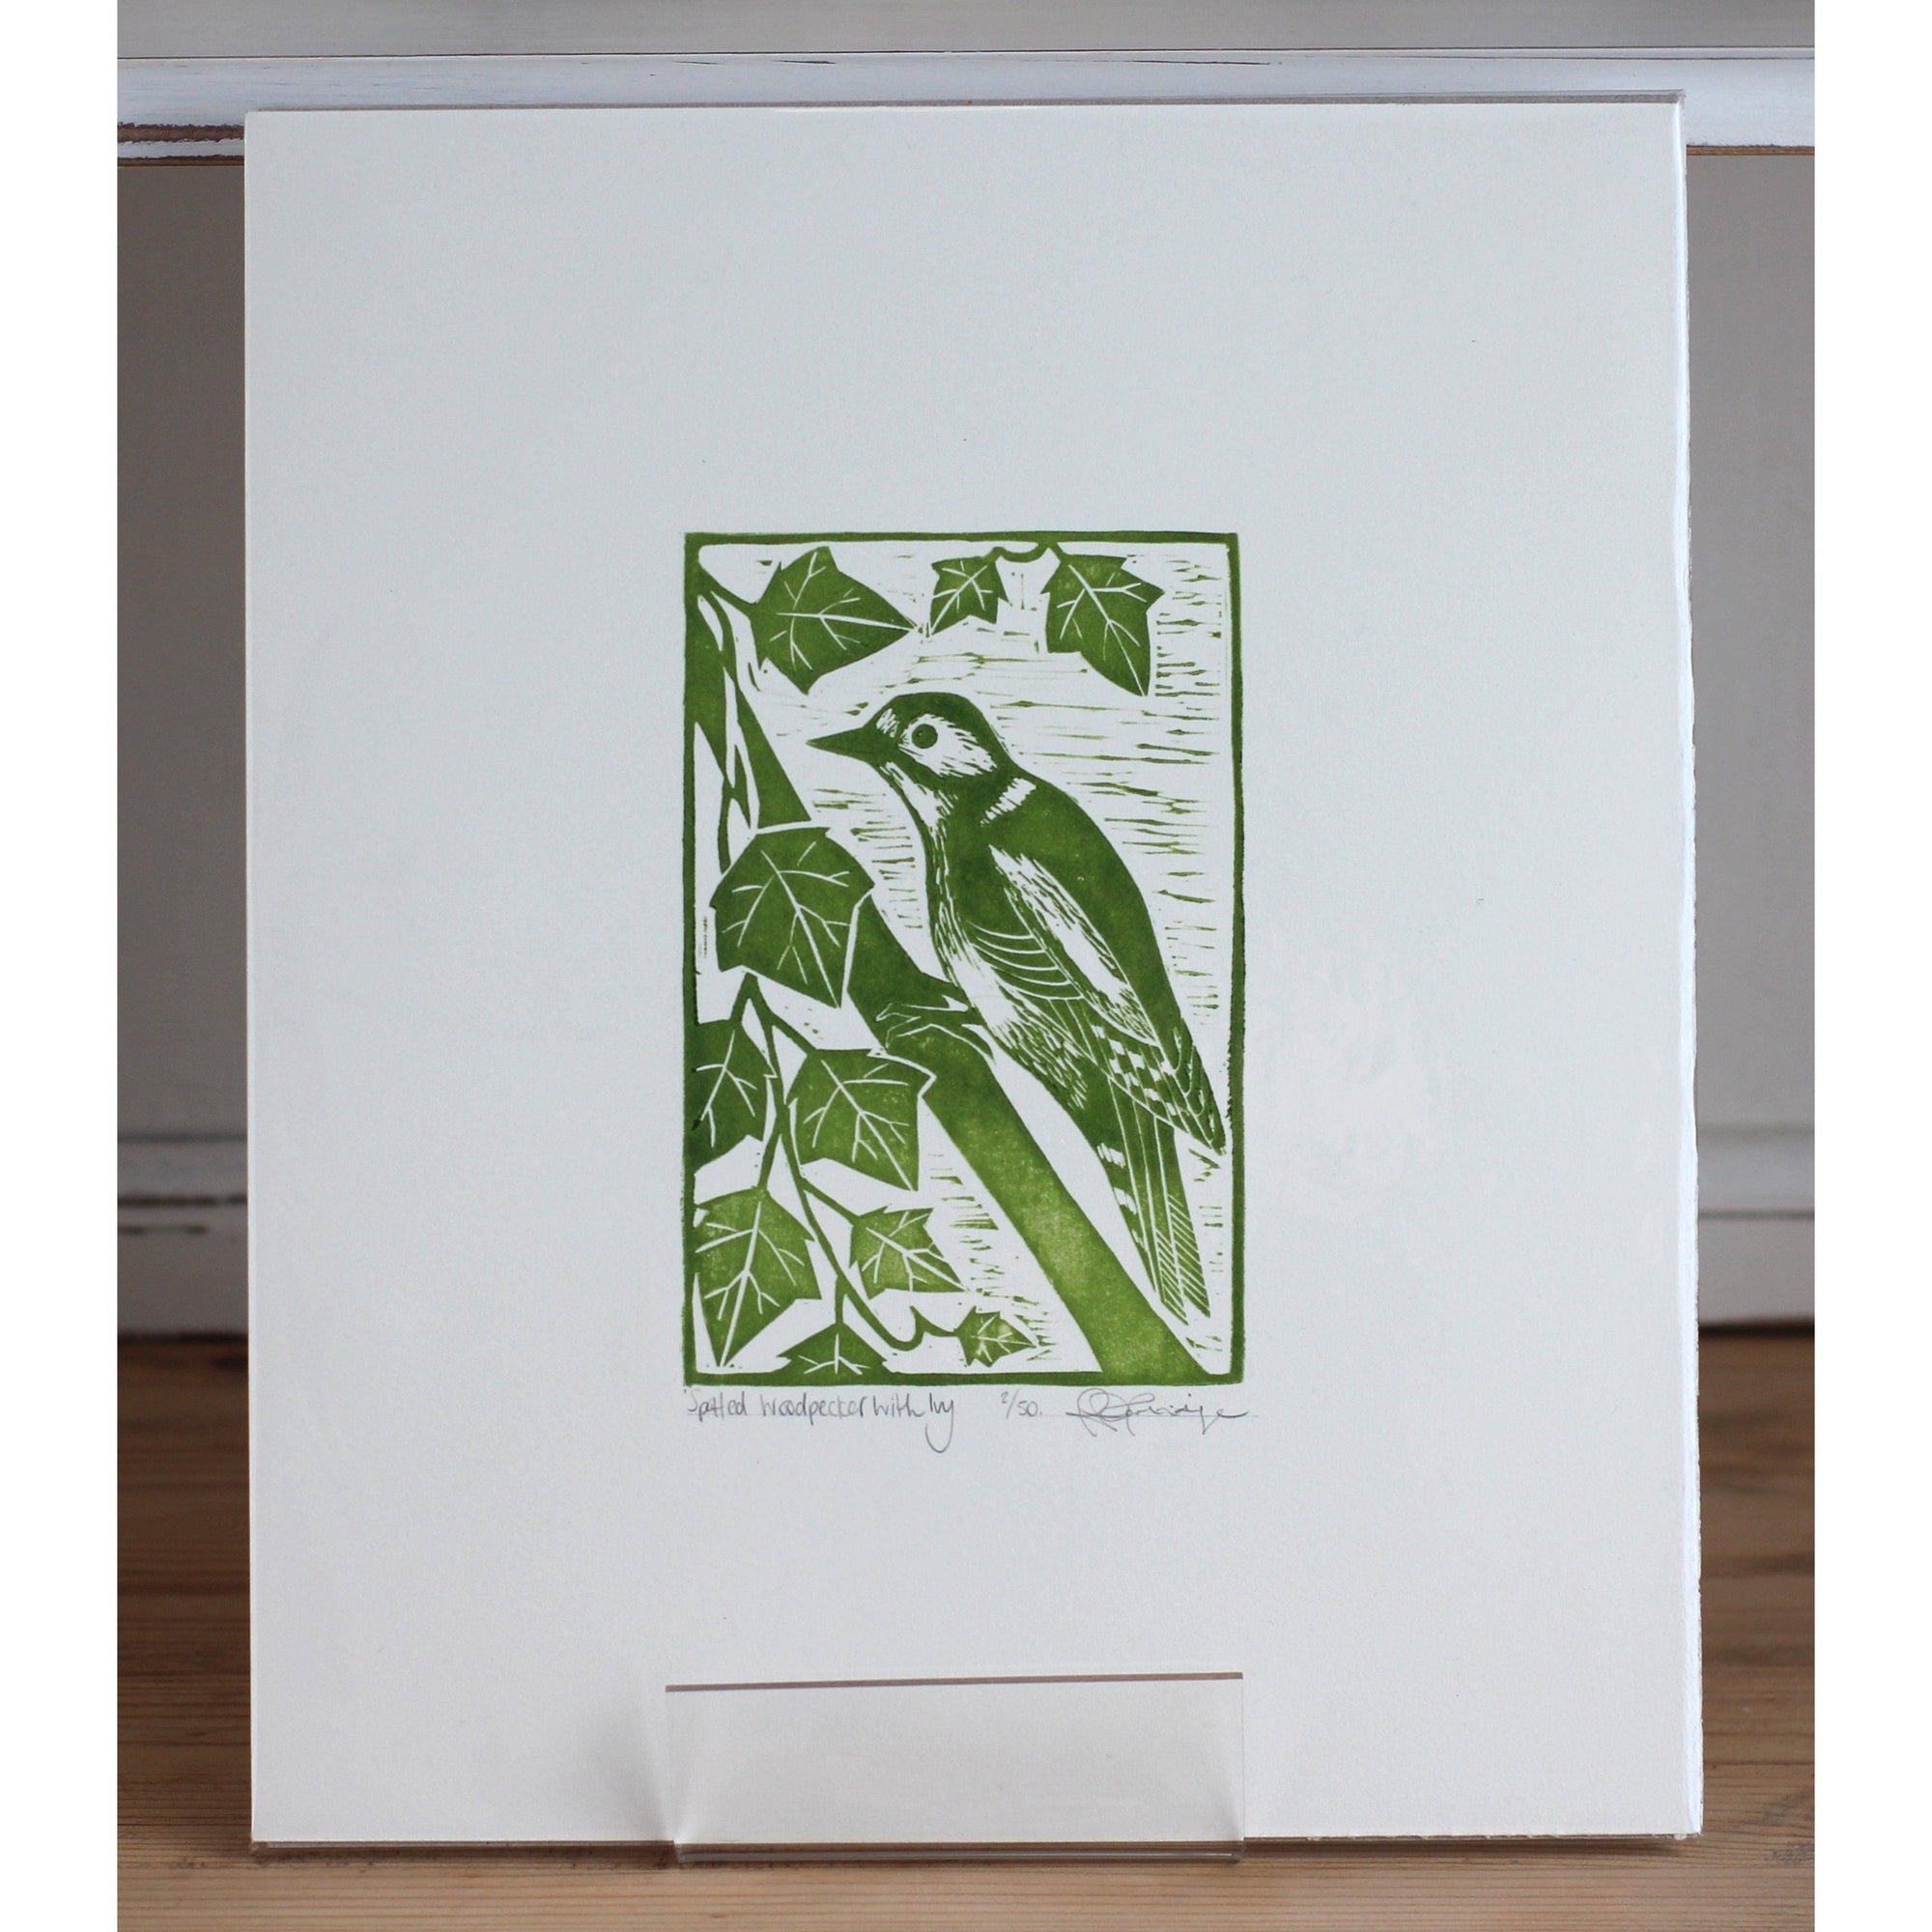 'Spotted woodpecker with Ivy' by printmaker, Rhys Partridge, available at Padstow Gallery, Cornwall